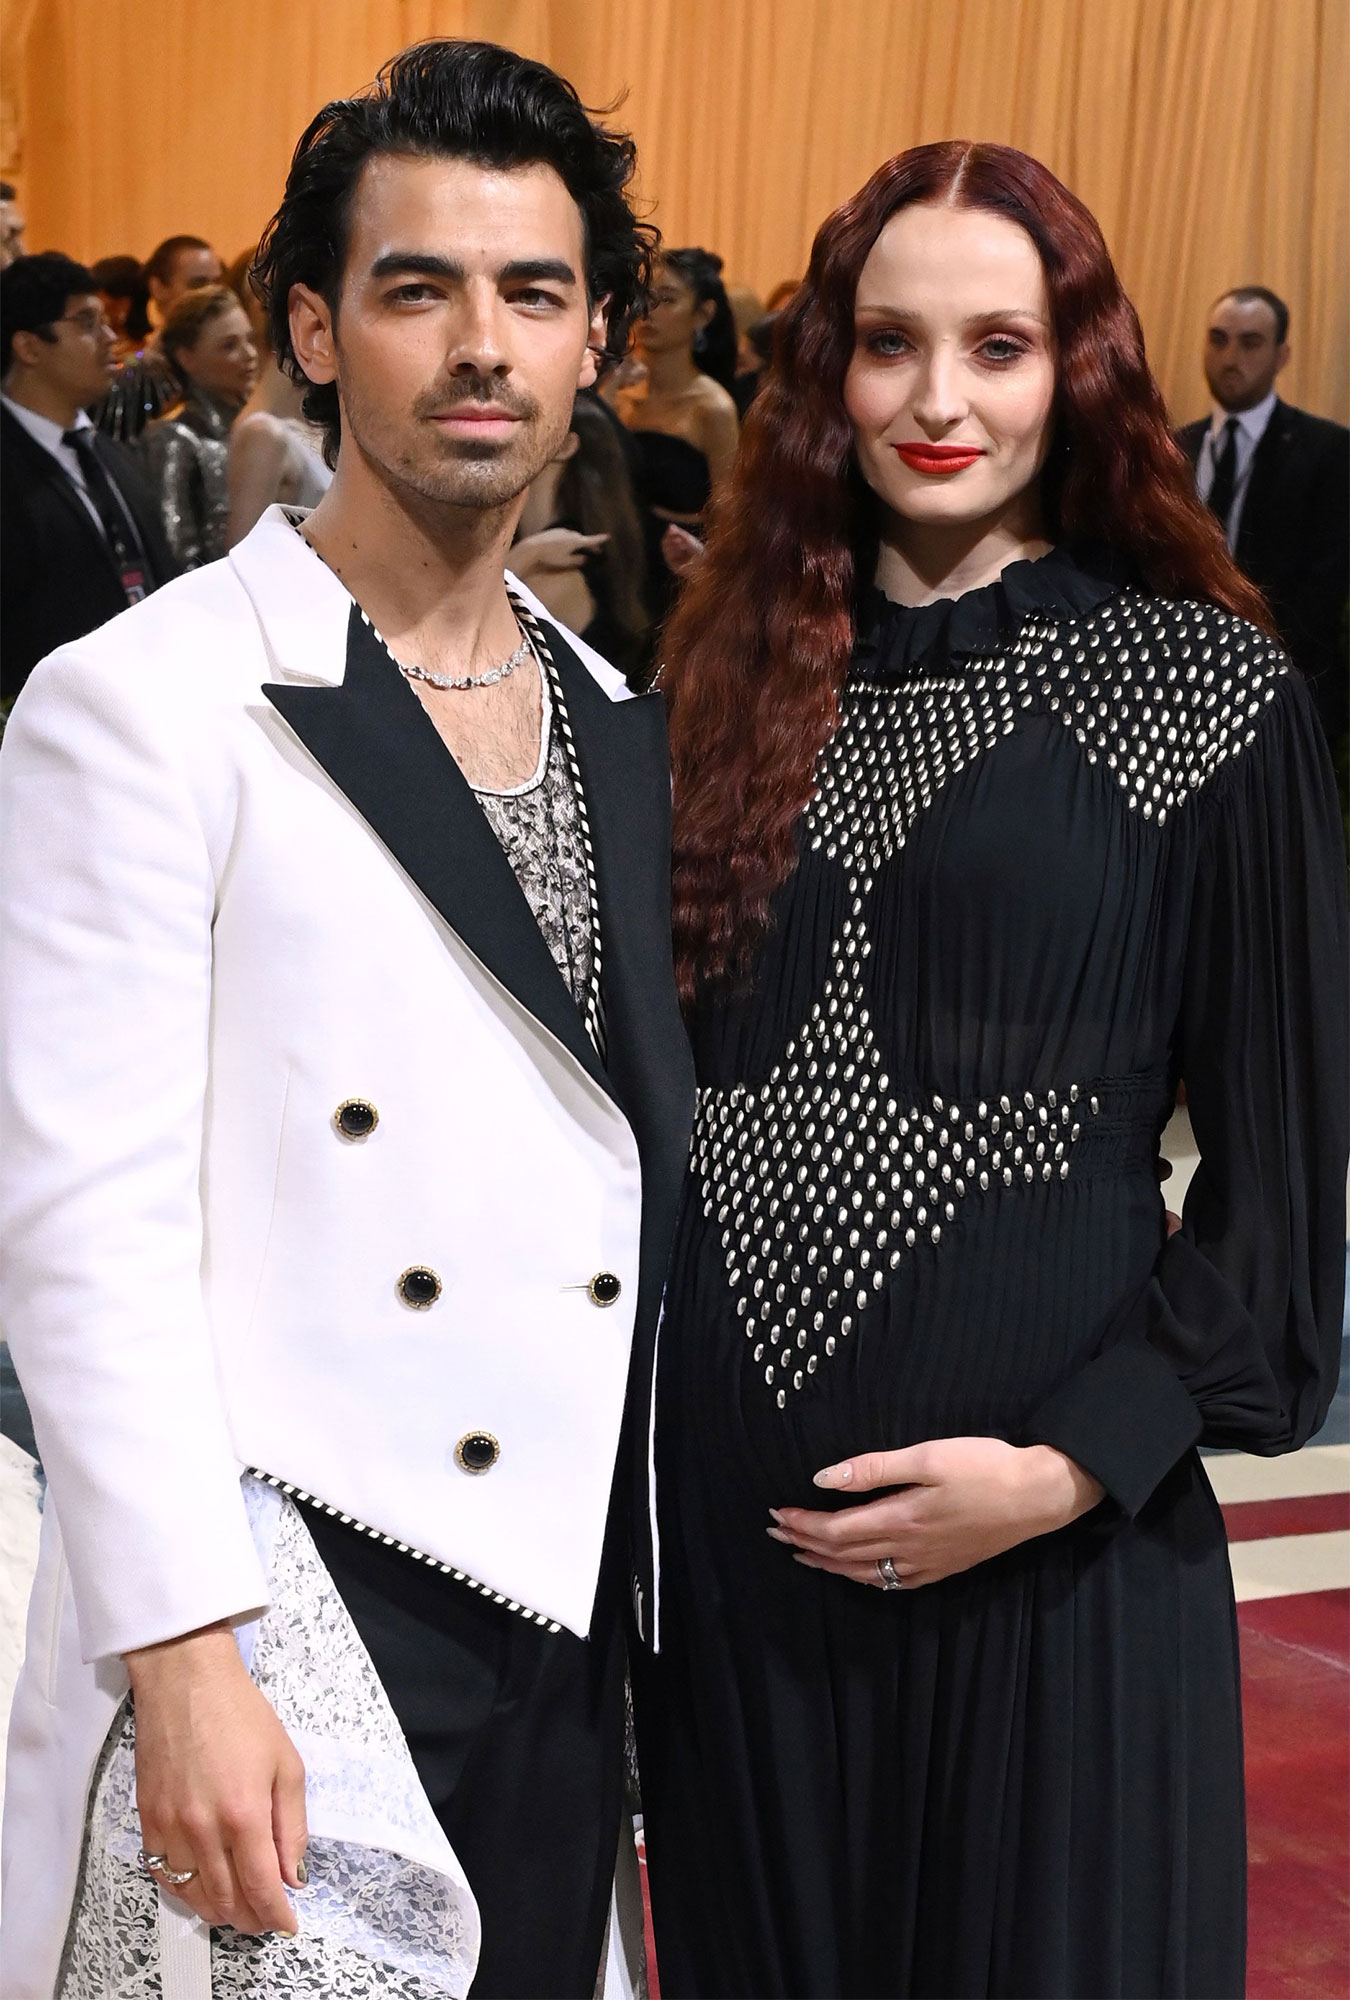 Joe Jonas and Sophie Turner of 'Game of Thrones' Attend Met Gala  After-Party Together